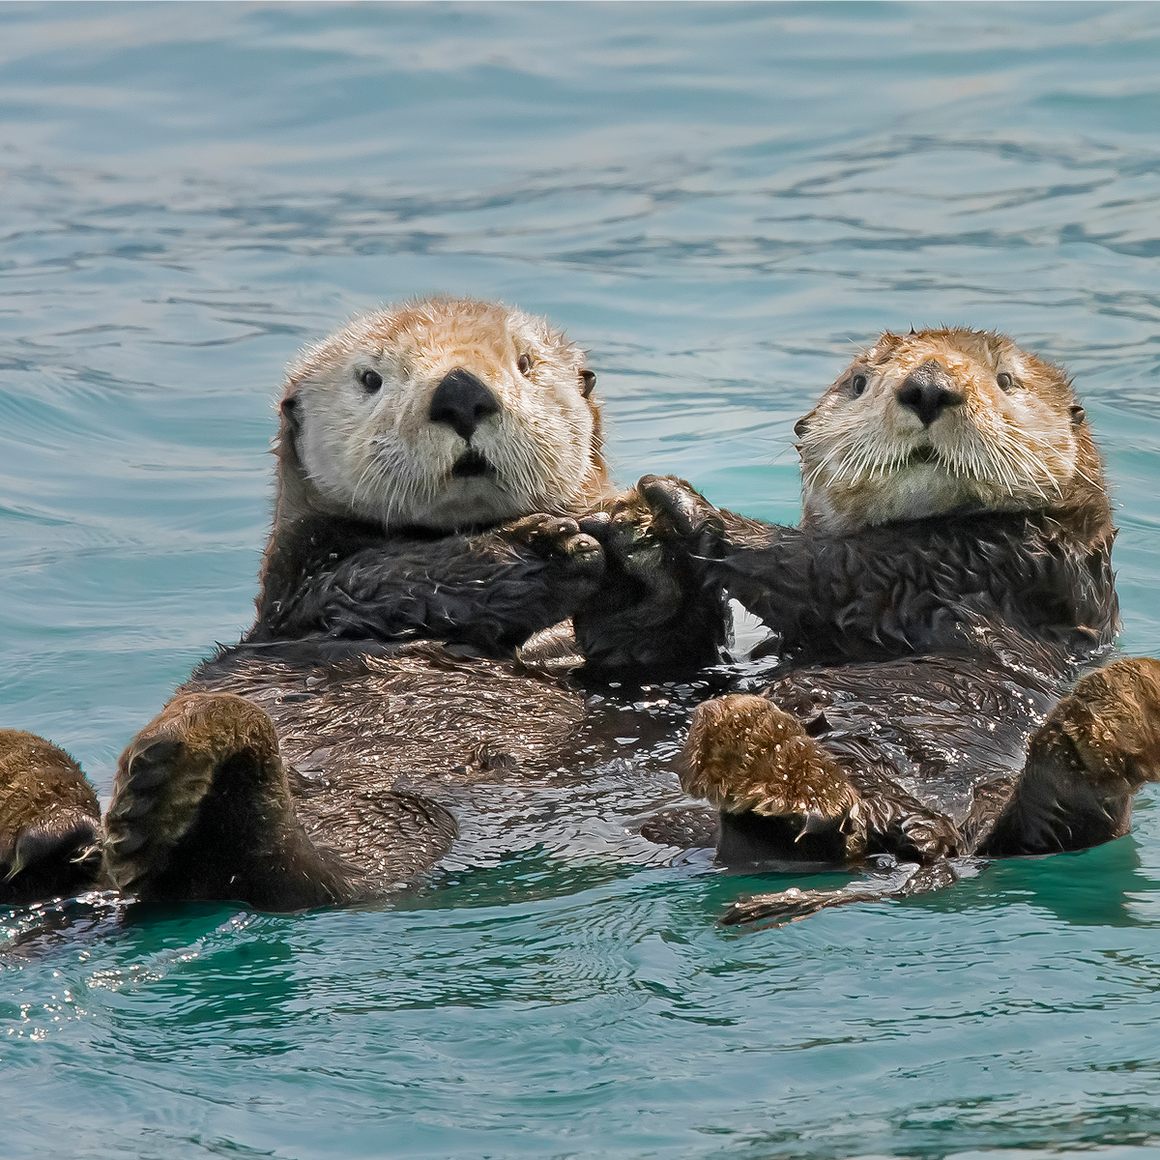 Sea otters holding hands.